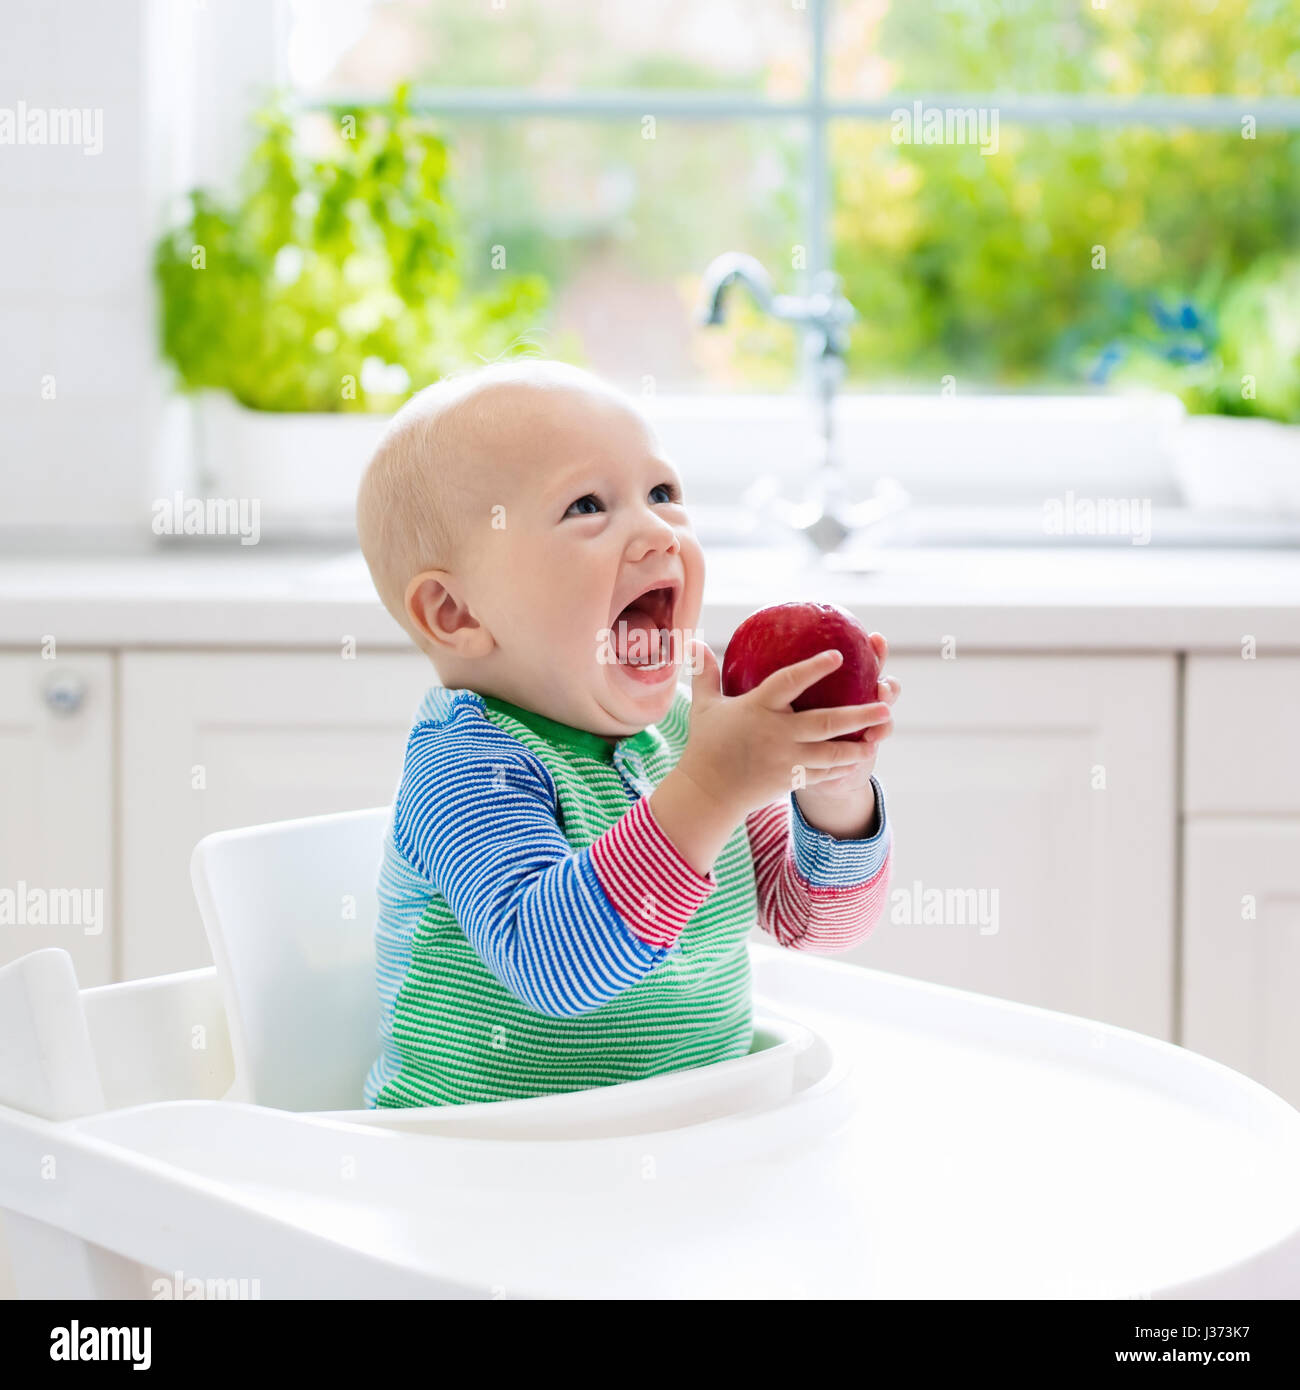 Baby eating fruit. Little boy biting apple sitting in white high chair in sunny kitchen with window and sink. Healthy nutrition for kids. Solid food f Stock Photo